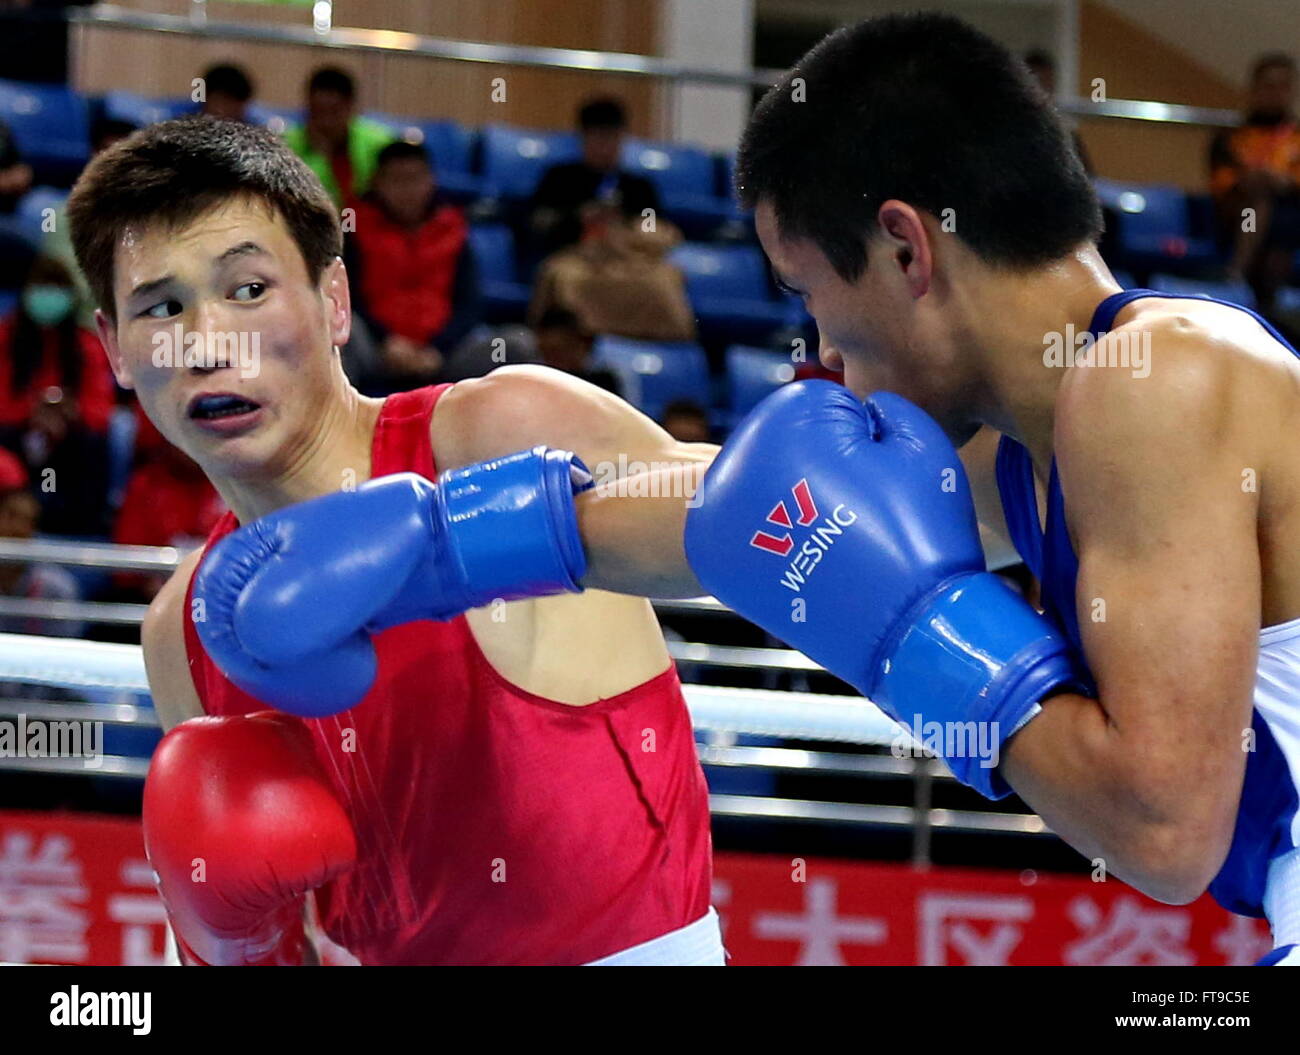 Qian'an, China's Hebei Province. 26th Mar, 2016. Enkh-Amar Kharkhuu(L) of Mongolia competes with Jan Chun-Hsien of Chinese Taipei during their men's 52kg category of Asia/Oceania Zone boxing event qualifier for 2016 Rio Olympic Games in Qian'an, north China's Hebei Province, March 26, 2016. Enkh-Amar Kharkhuu won the match 3-0. Credit:  Yang Shiyao/Xinhua/Alamy Live News Stock Photo